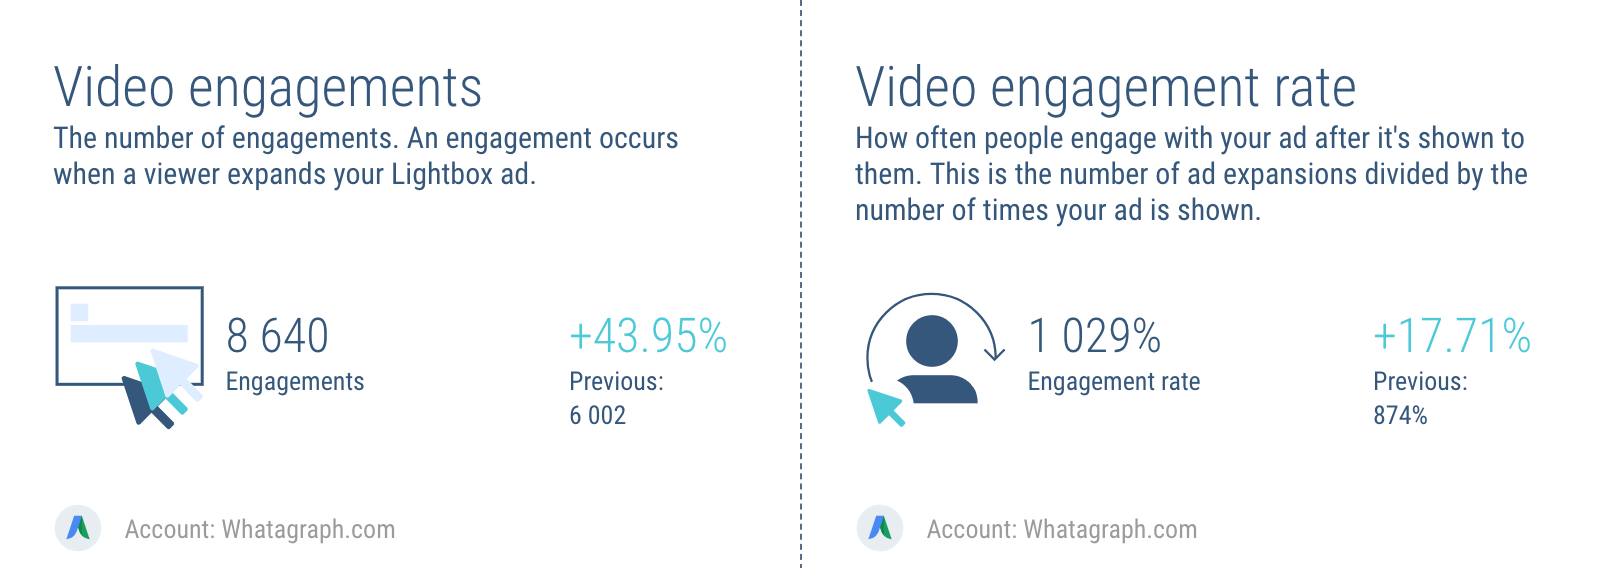 AdWords video engagement